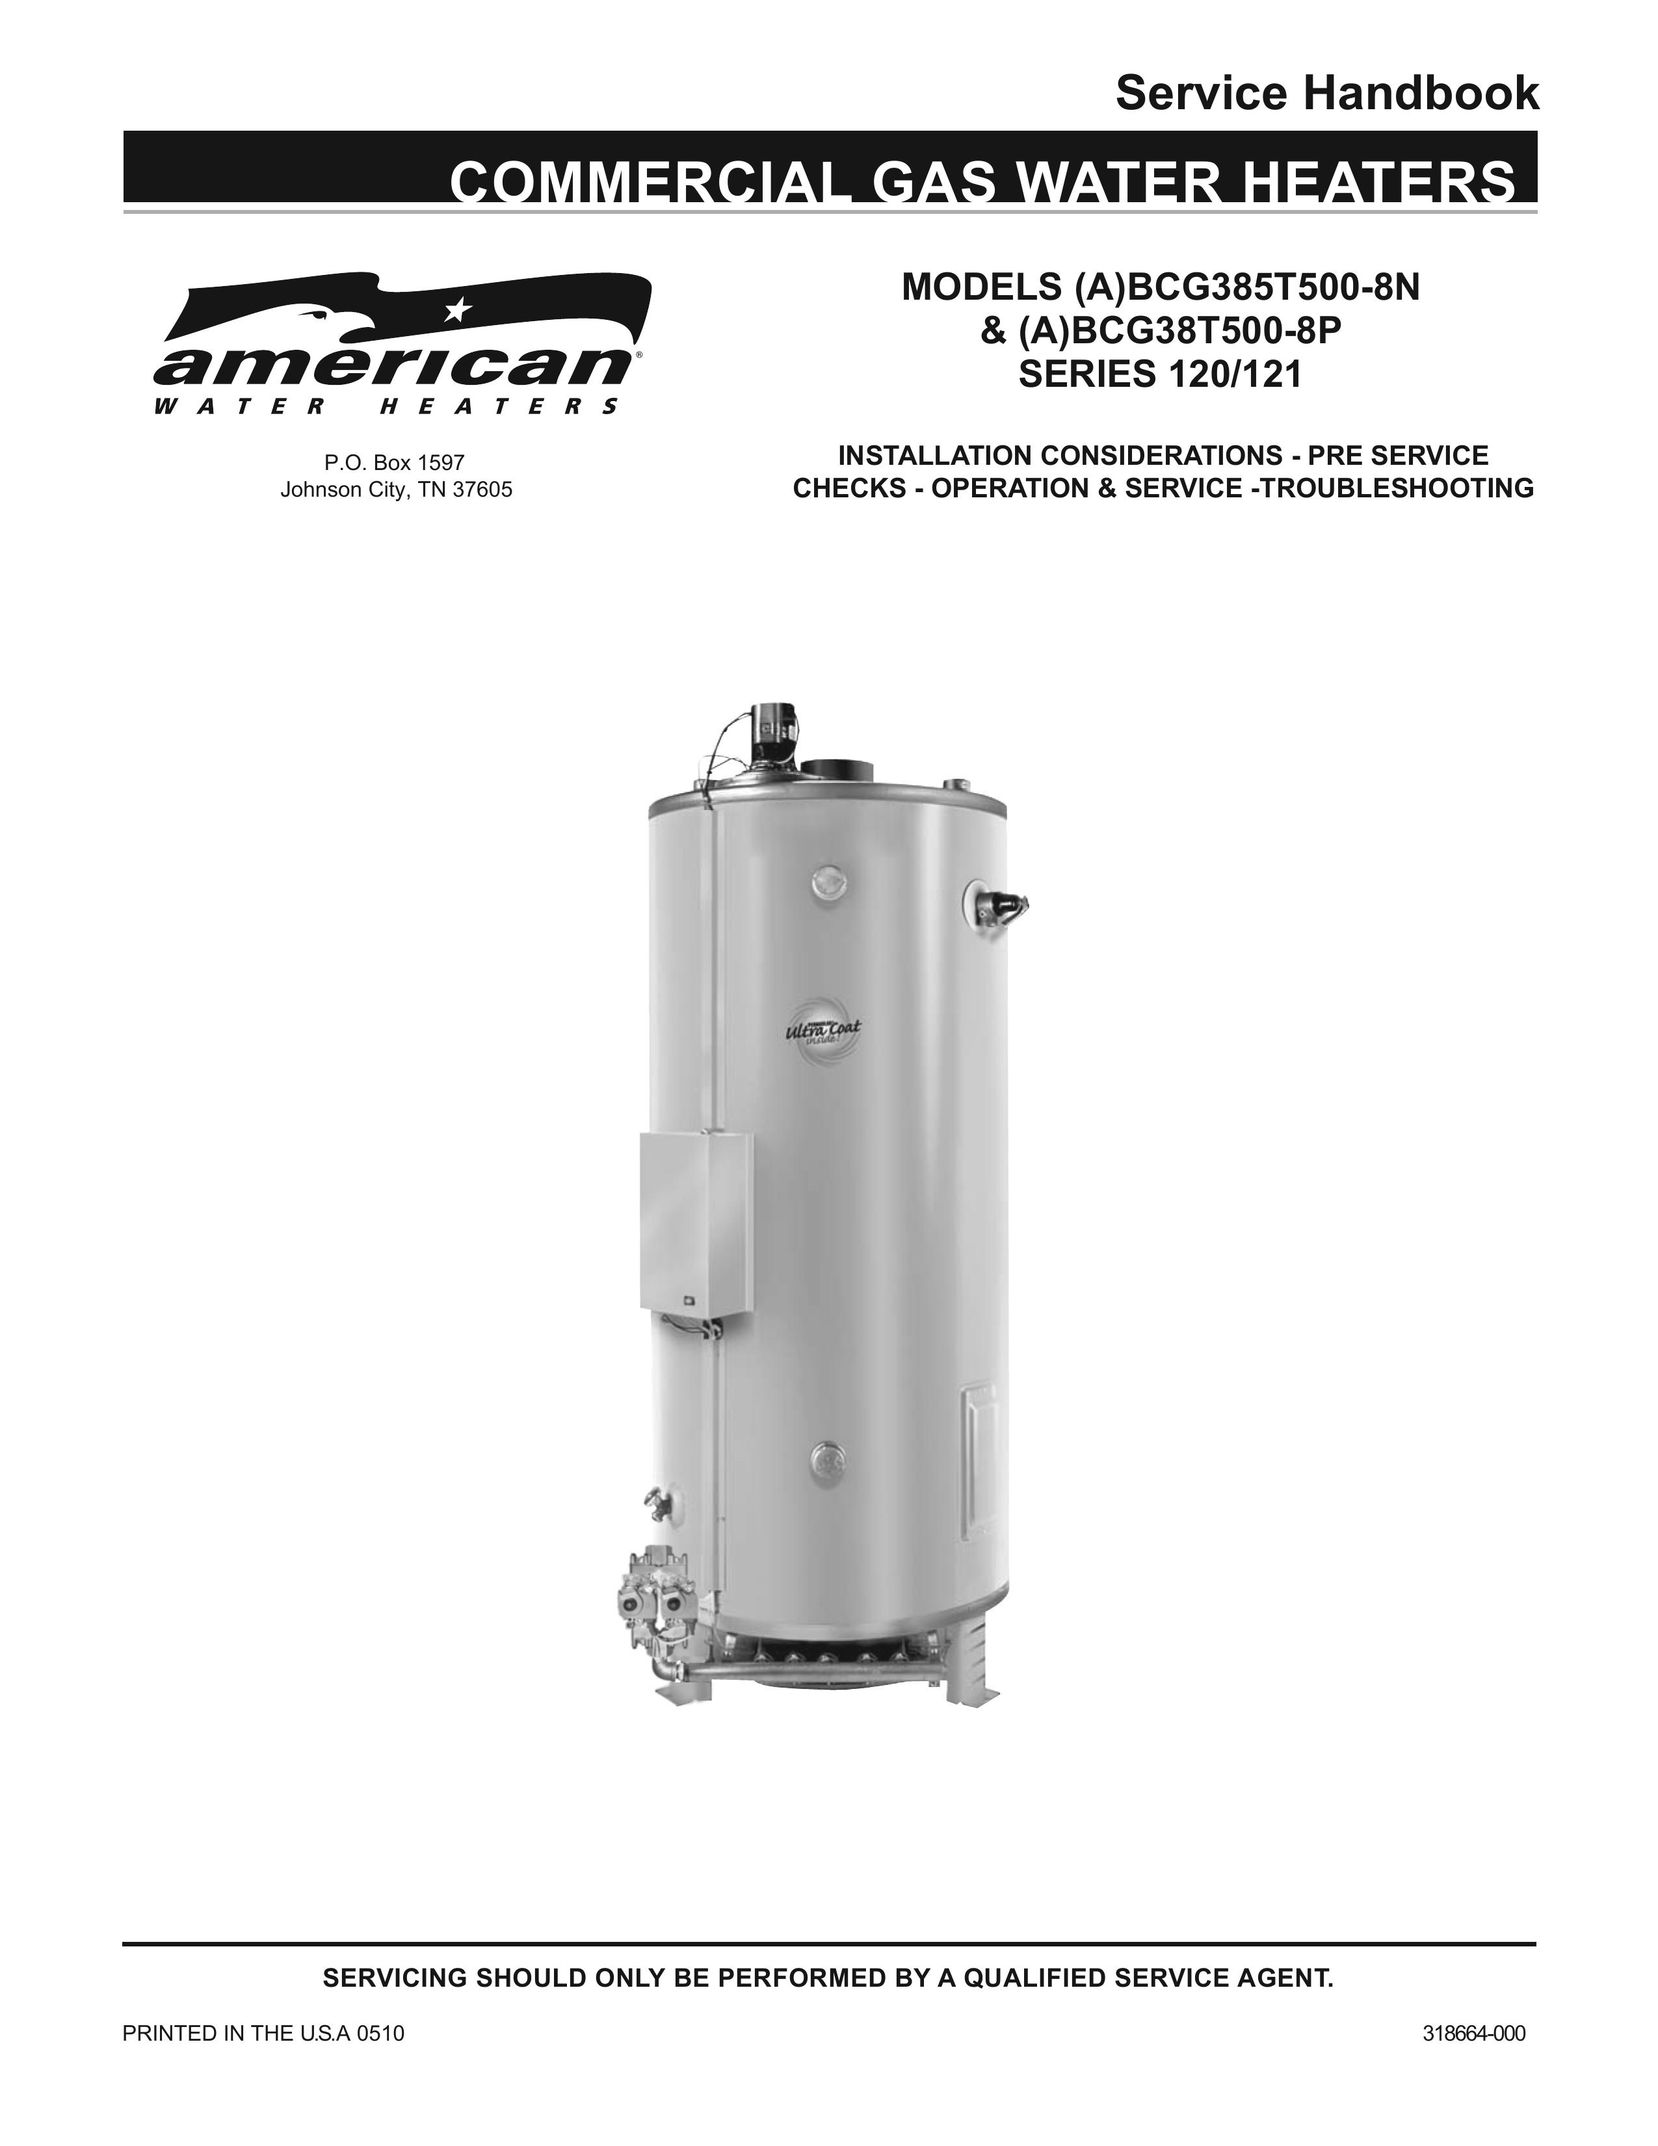 American Water Heater (A)BCG38T500-8P Water Heater User Manual